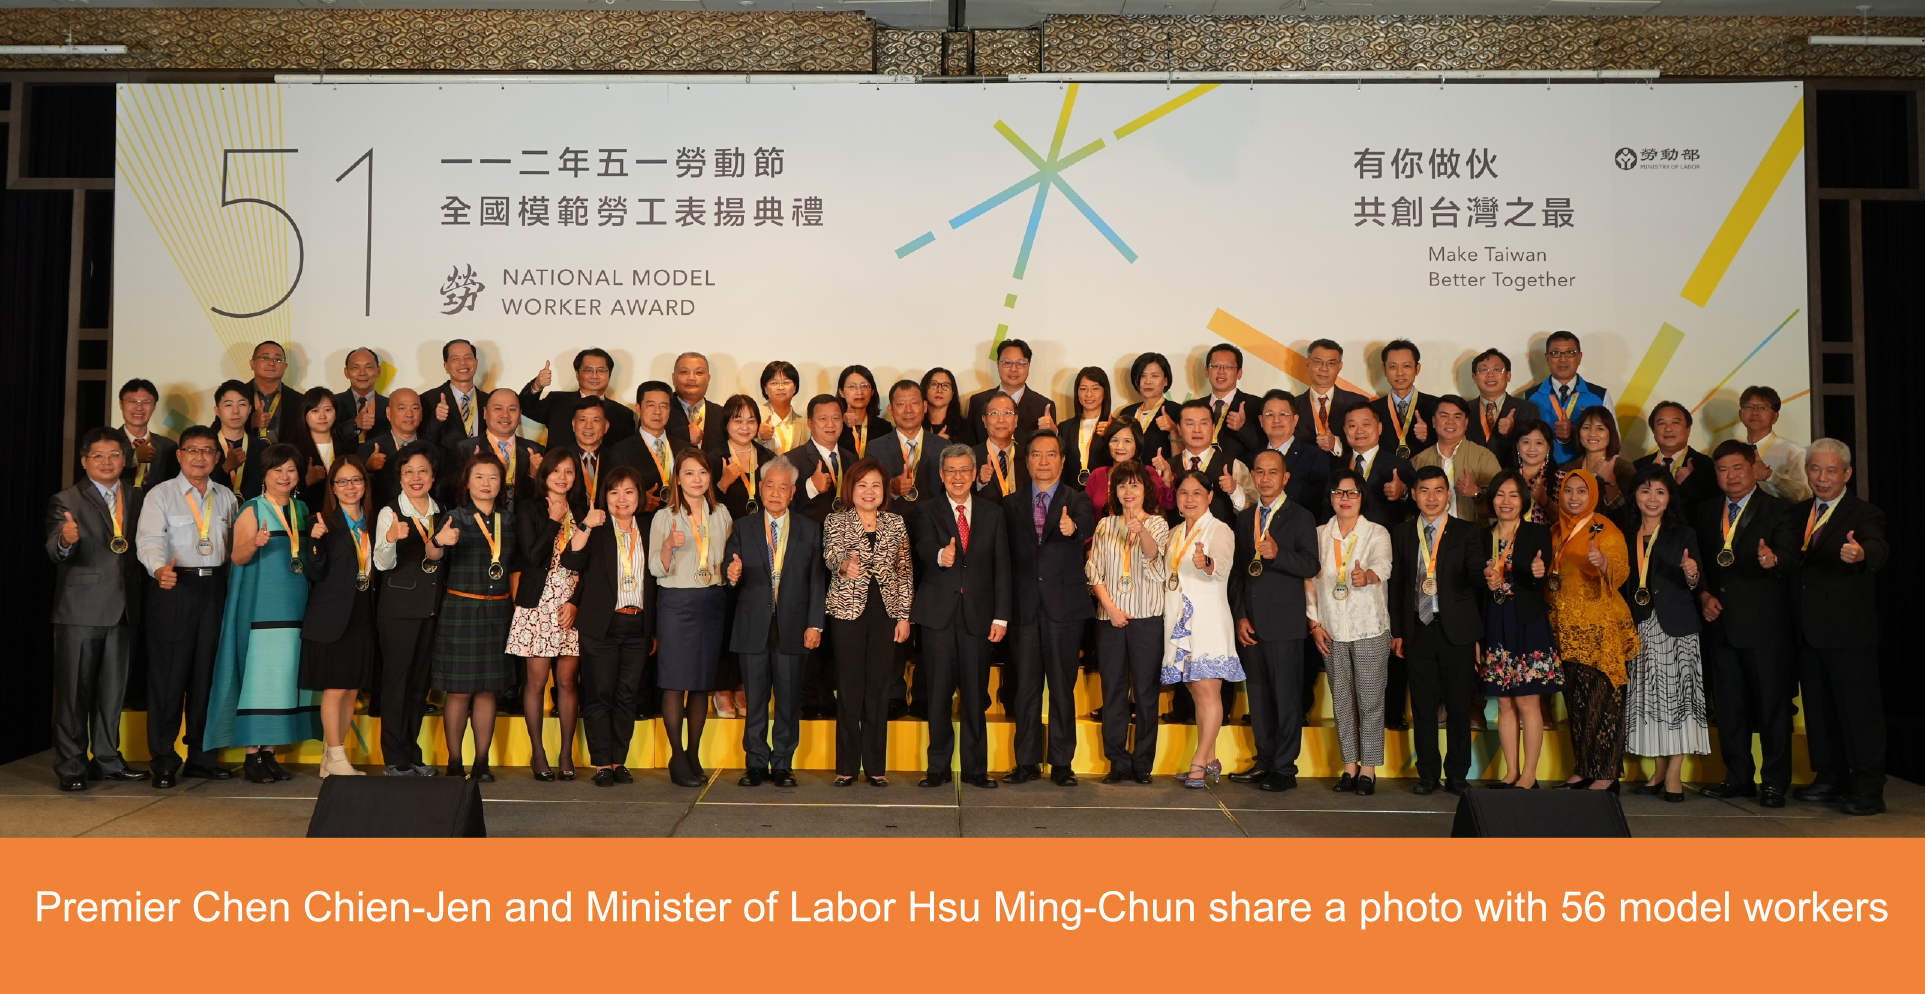 Premier Chen Chien-Jen Attends National Model Worker Award to Offer the Highest Respect to the Nation's Workers